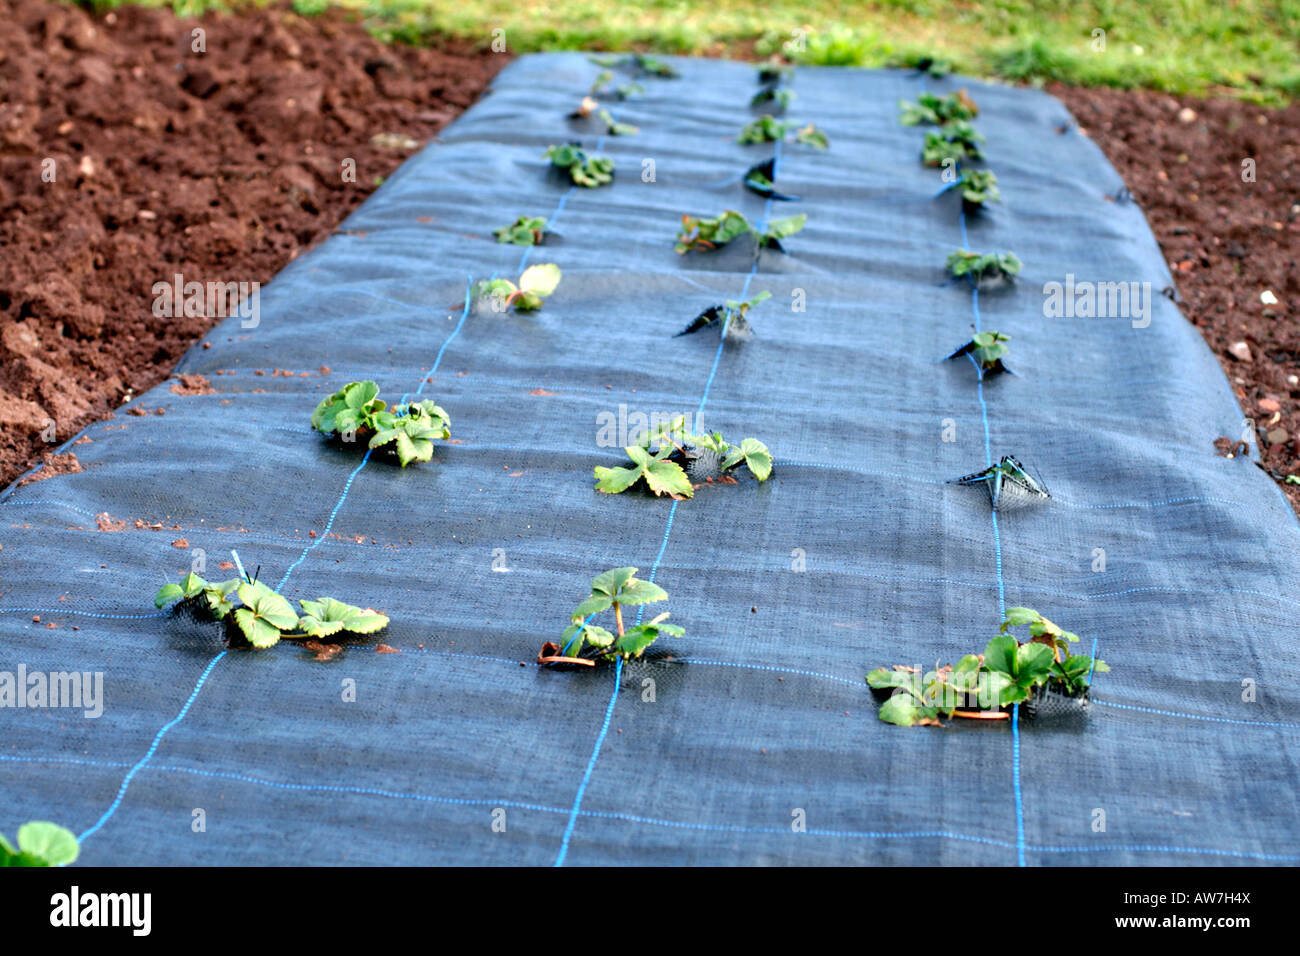 GROWING STRAWBERRIES THROUGH A MYPEX GROUND COVER MEMBRANE Stock Photo